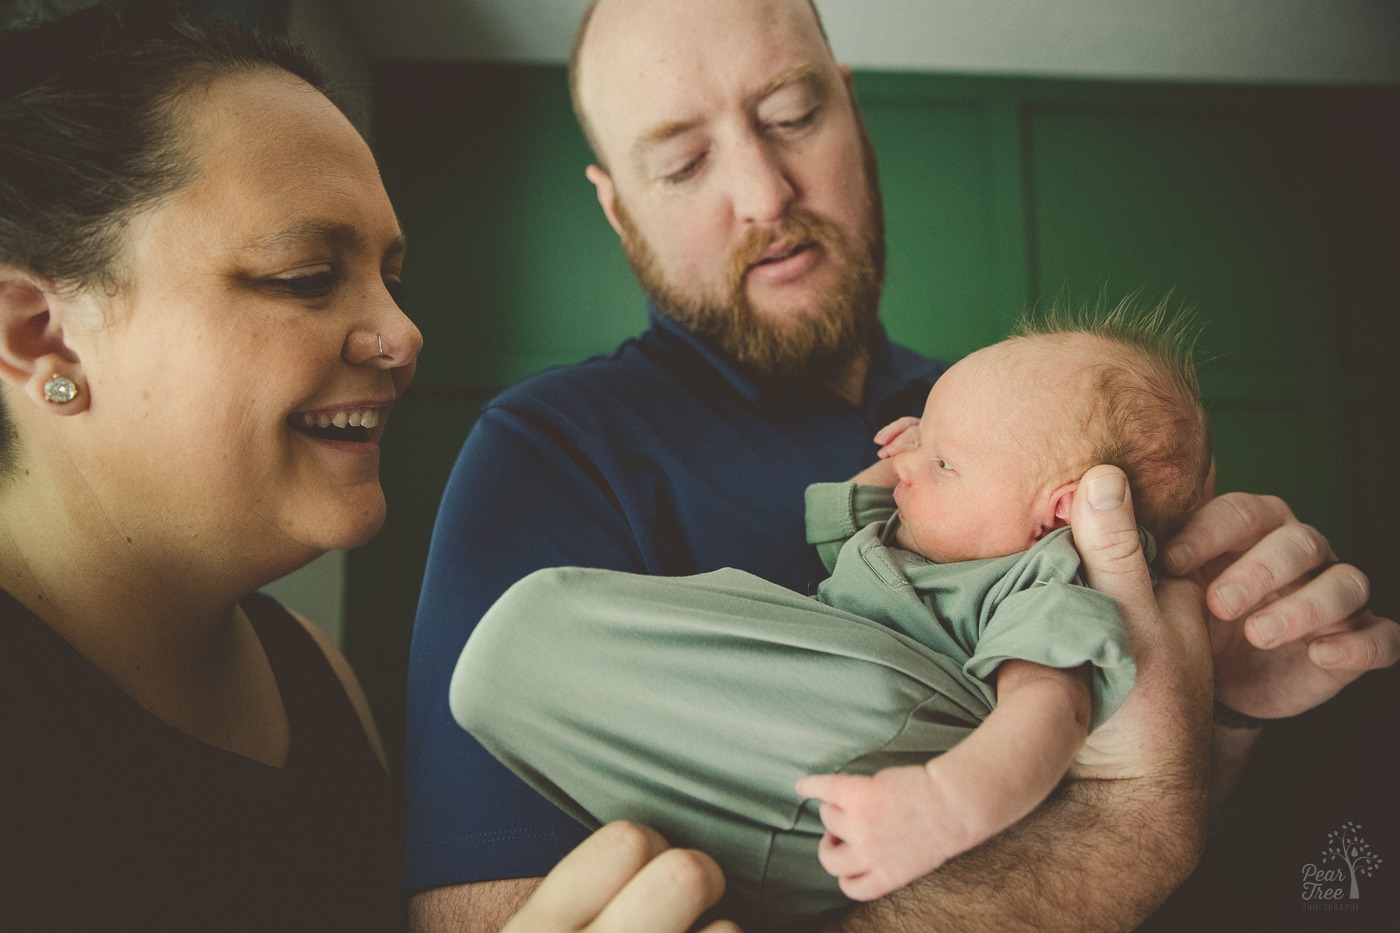 parents holding their newborn son and enjoying the mohawk they created with his hair